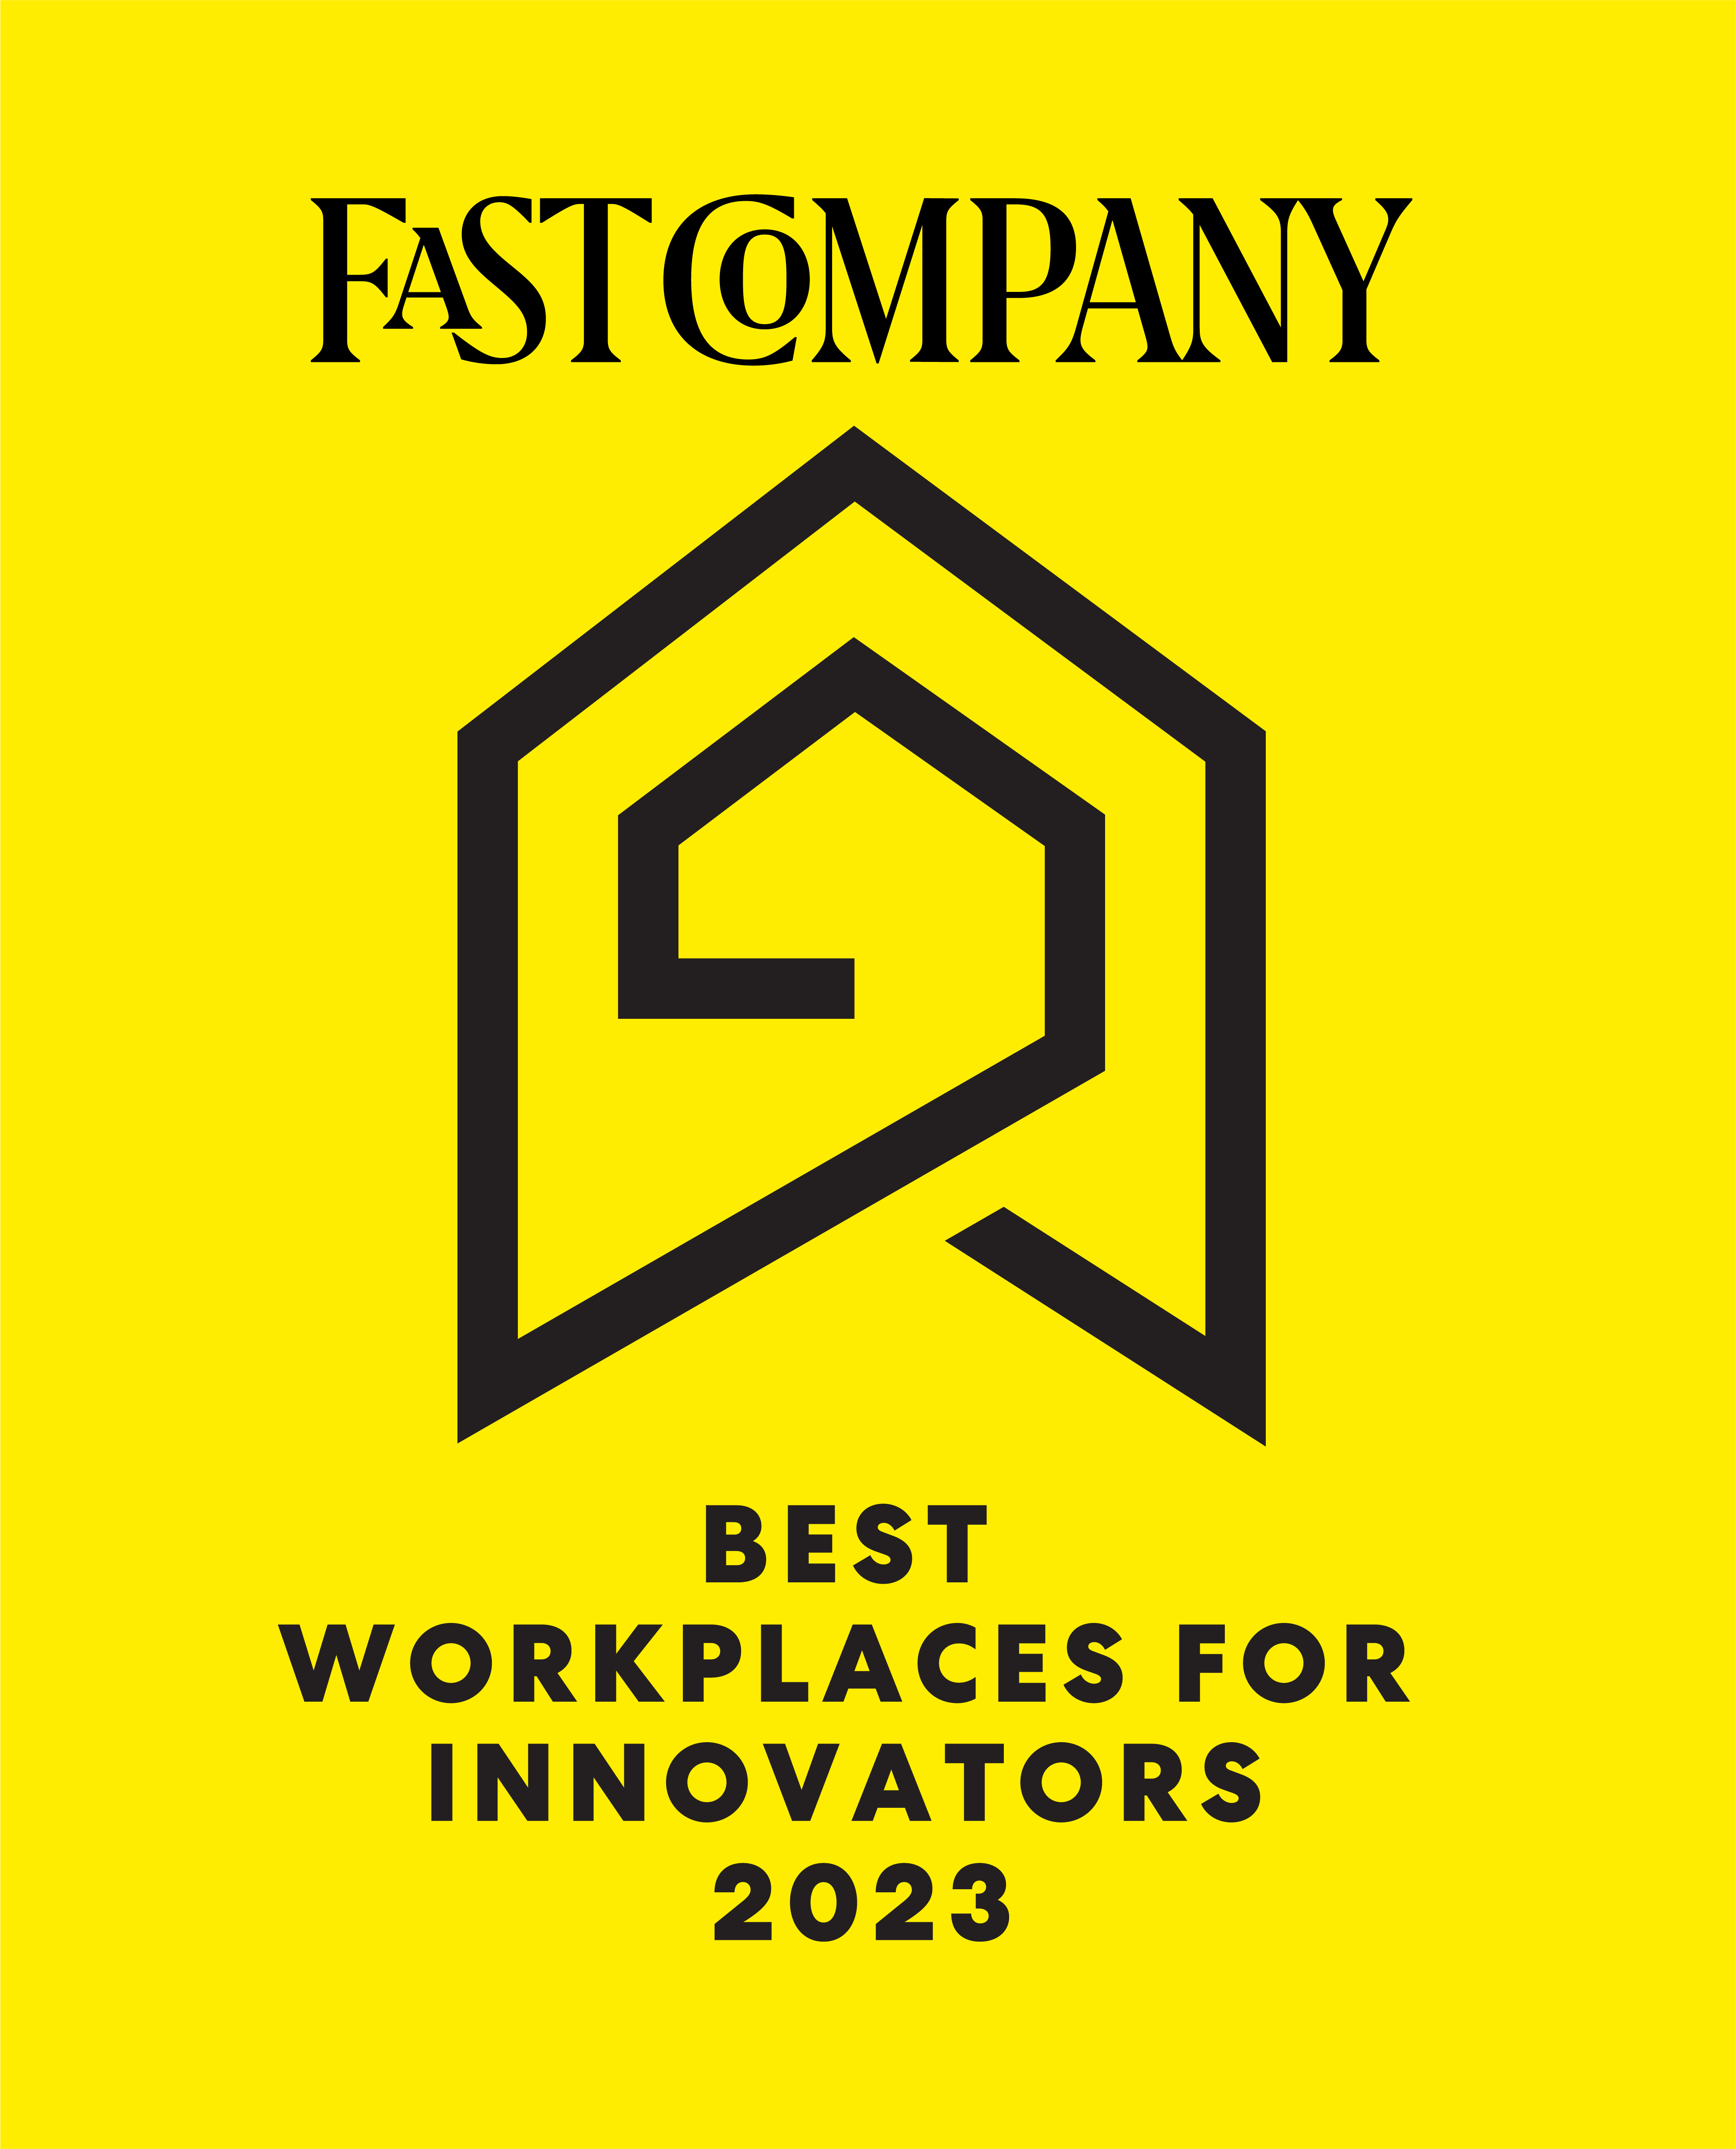 Fast Company 2023 Best Workplaces for Innovators badge on yellow background